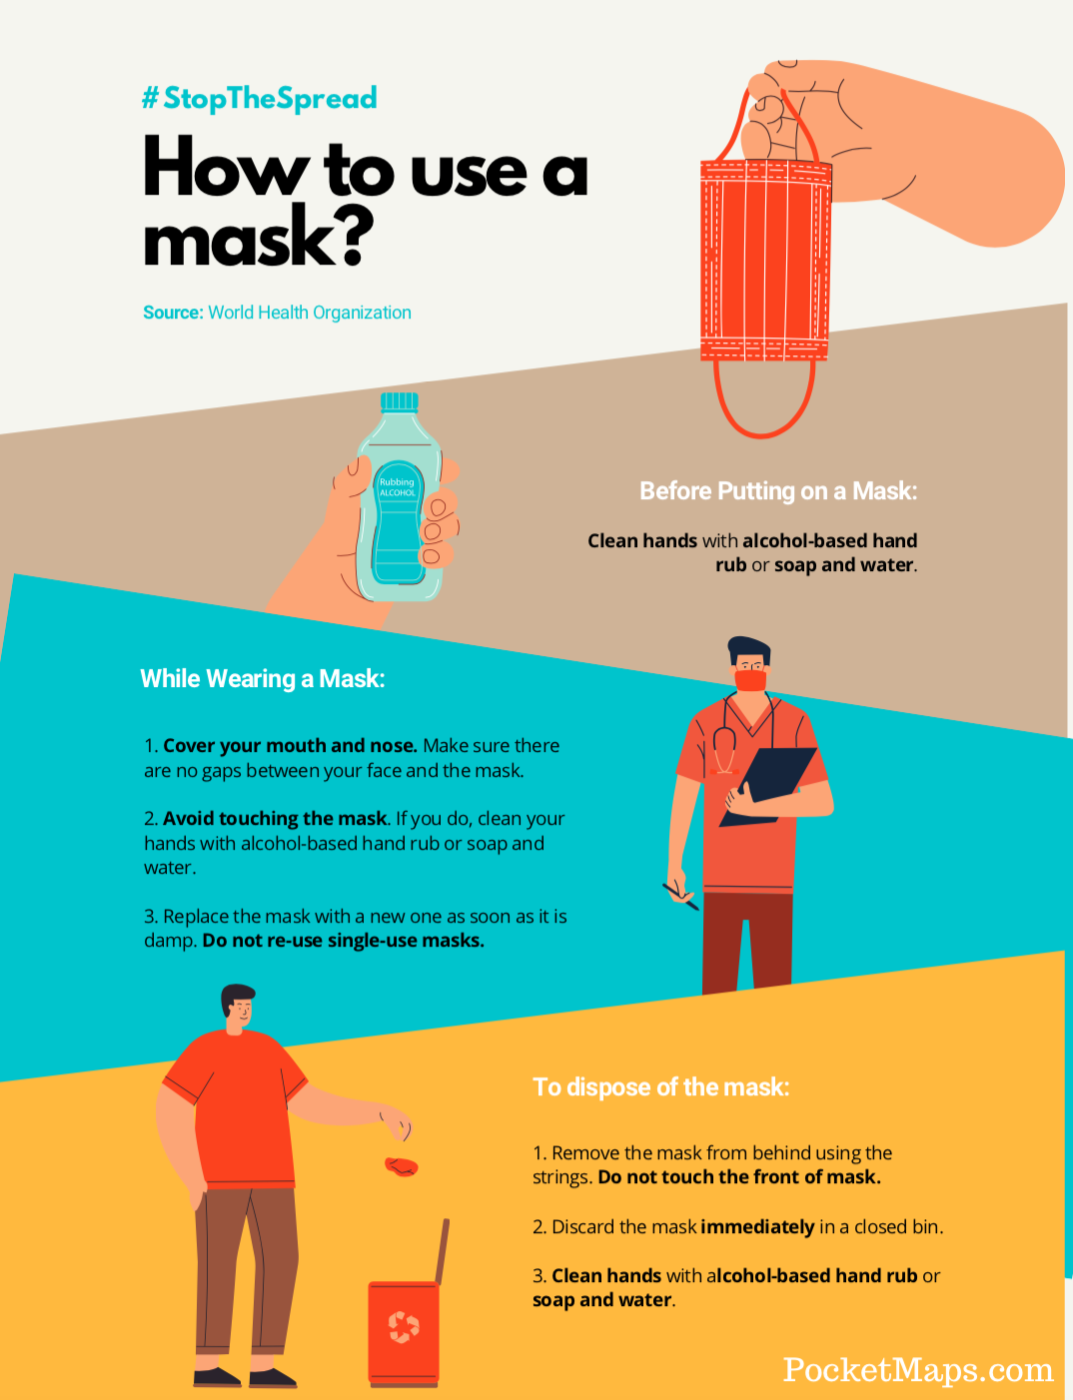 How to Use a Mask?